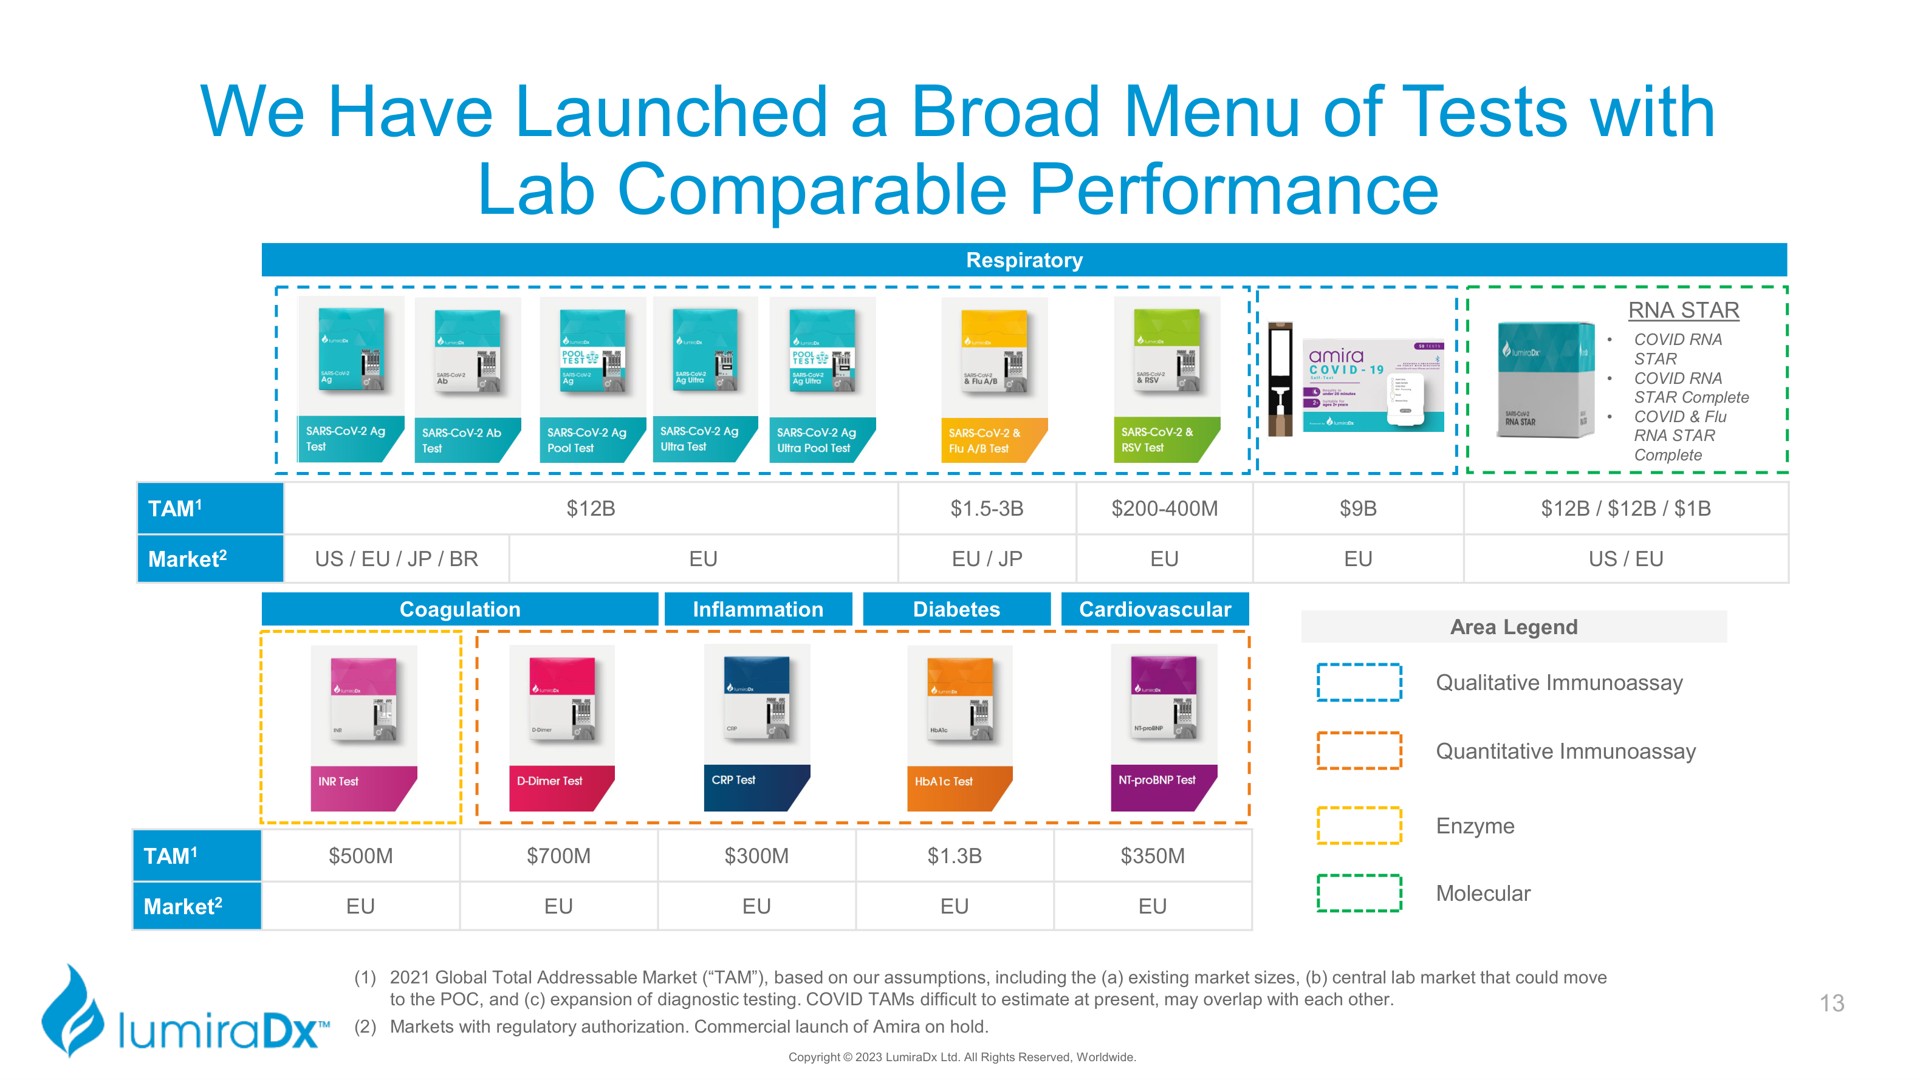 we have launched a broad menu of tests with lab comparable performance | LumiraDx